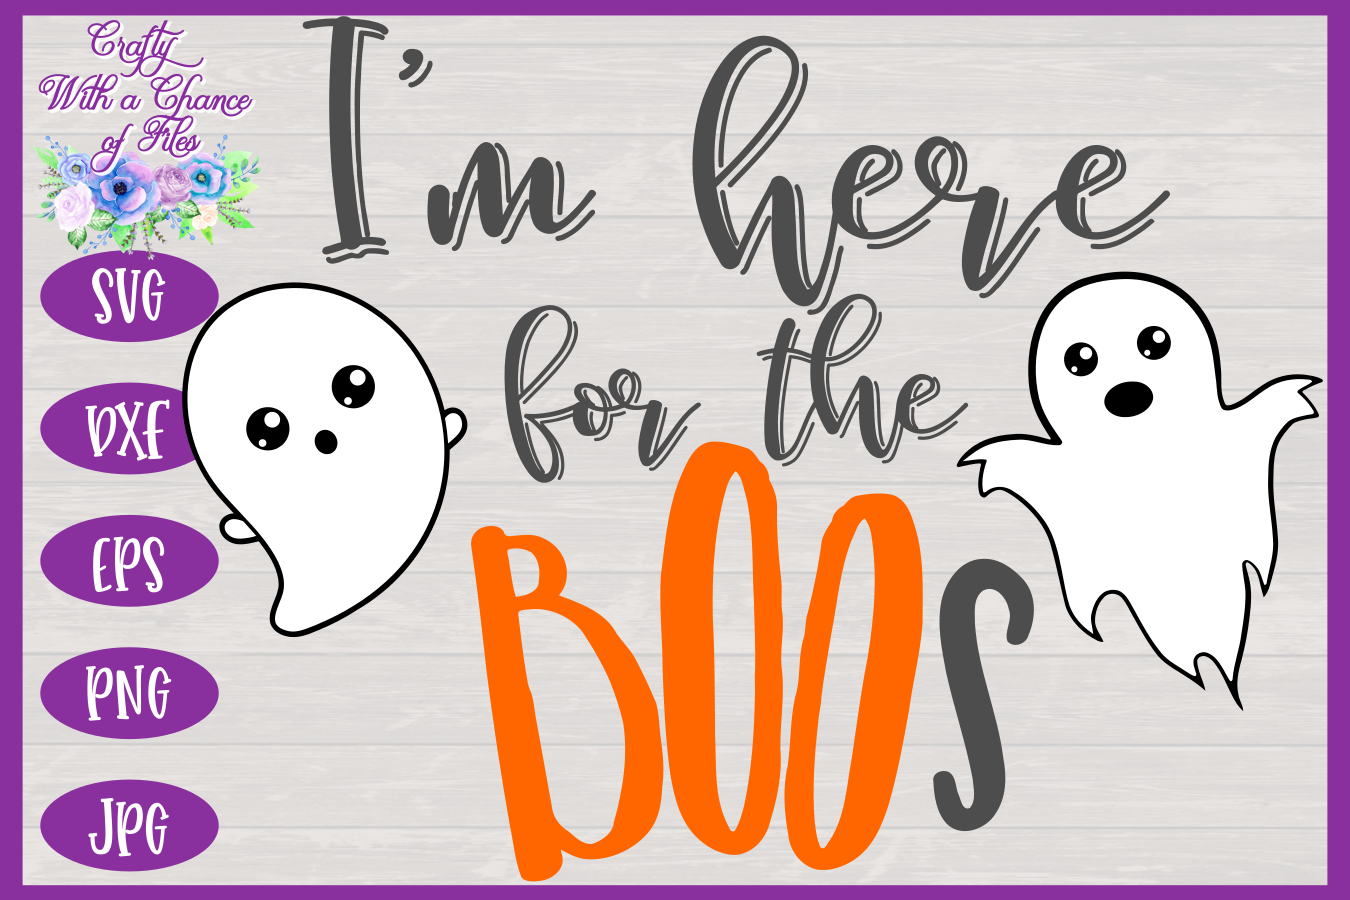 Halloween Svg Here For The Boos Svg Cute Ghost Svg By Crafty With A Chance Of Files Thehungryjpeg Com